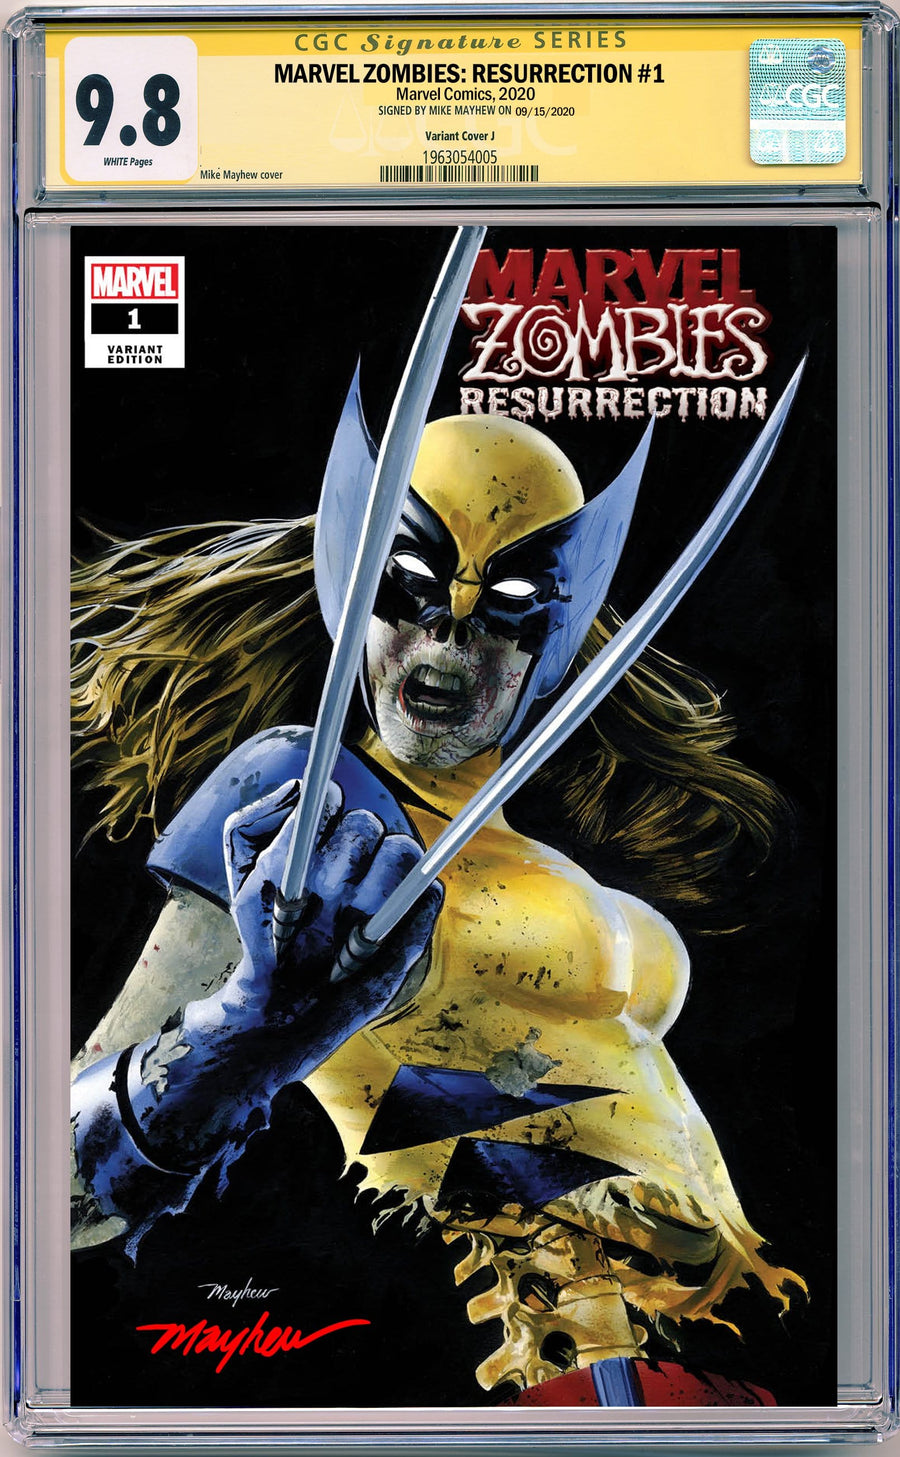 MARVEL ZOMBIES: RESURRECTION #1 EXCLUSIVE VARIANTS CGC SIG SERIES 9.6 AND ABOVE OPTIONS